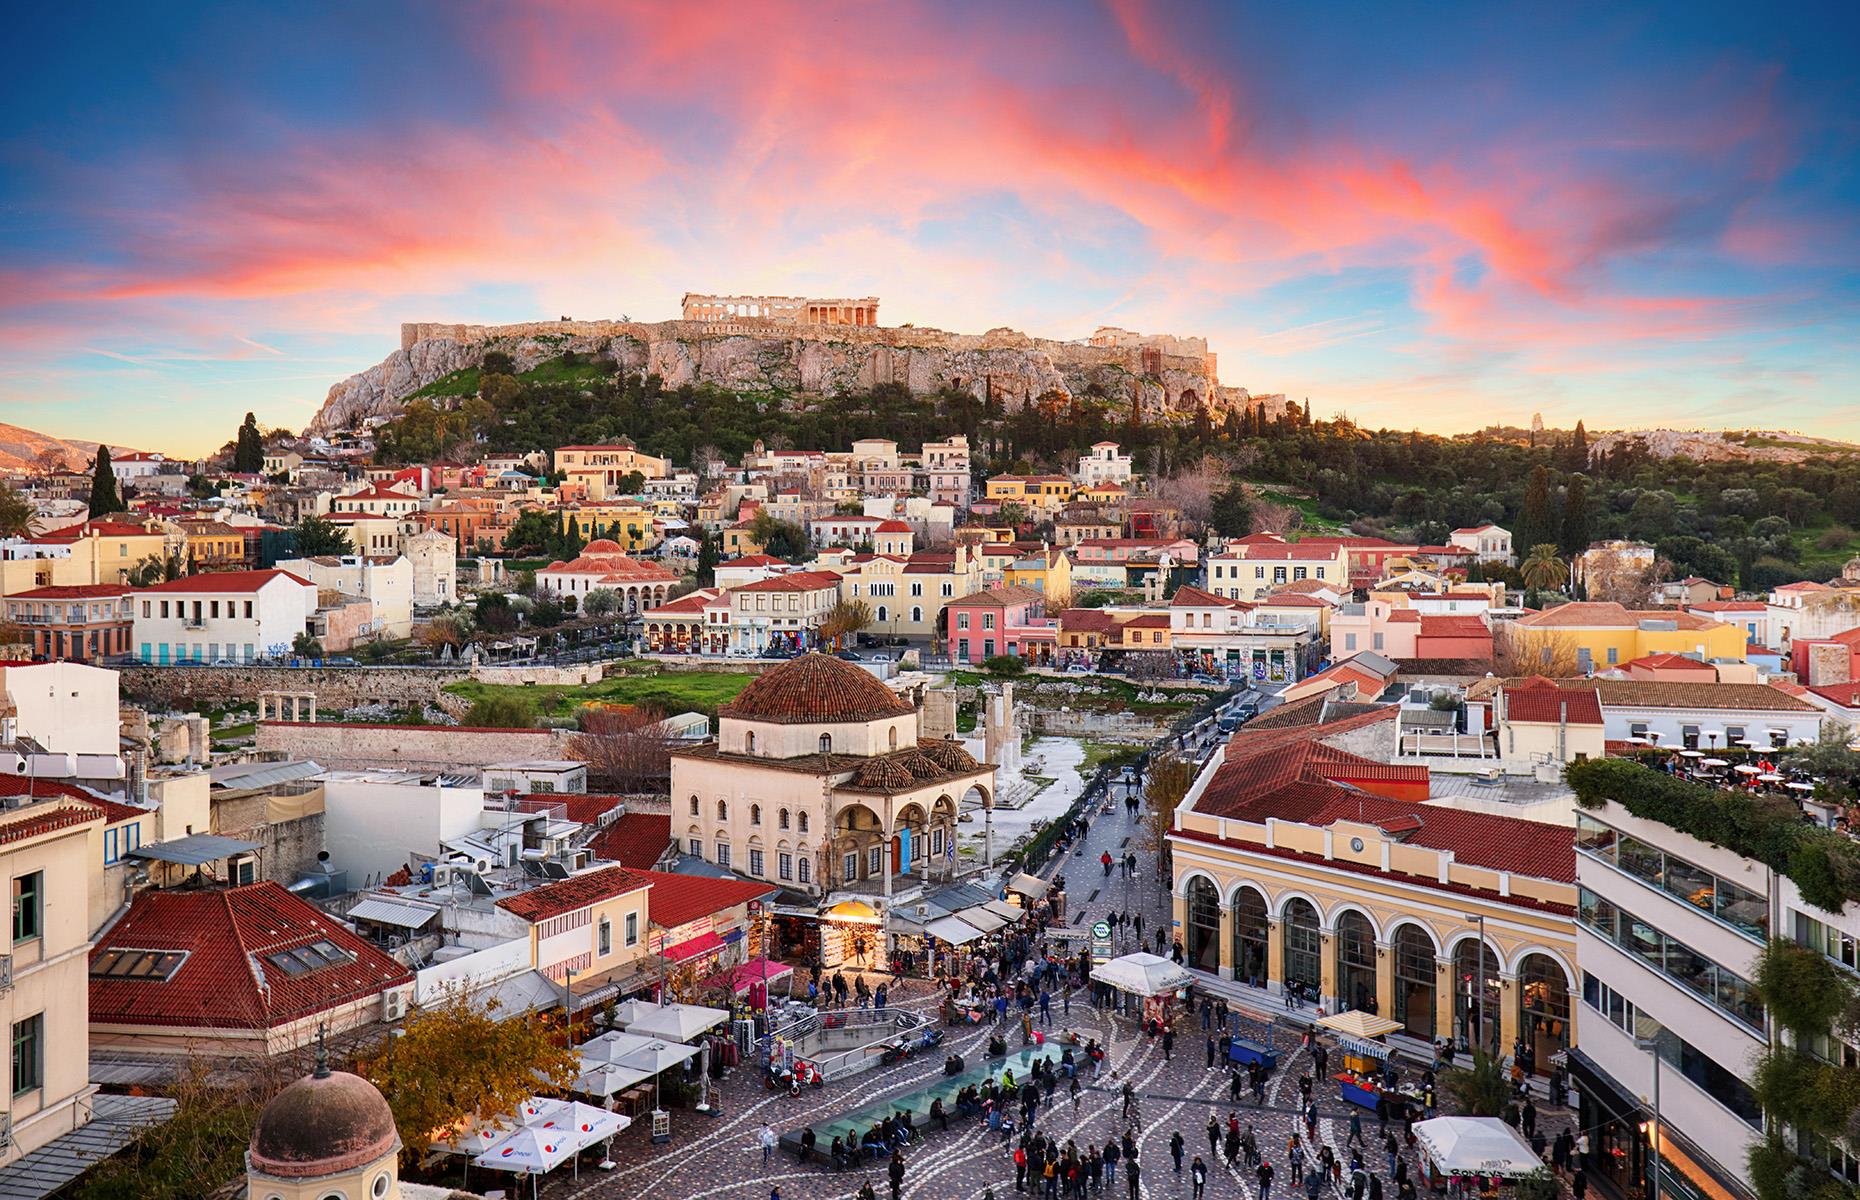 <p>Athens has had to lay down the law to prevent overcrowding of its celebrated historic attractions. The Acropolis, Greece’s most visited archaeological site, drew so many visitors that in September 2023, authorities capped the number of entrants at 20,000 a day, with slots available via an online booking site.</p>  <p>However, Greek authorities aren’t stopping there. Starting in April 2024, the new booking system will also be applied to over 25 other archaeological sites across the country.</p>